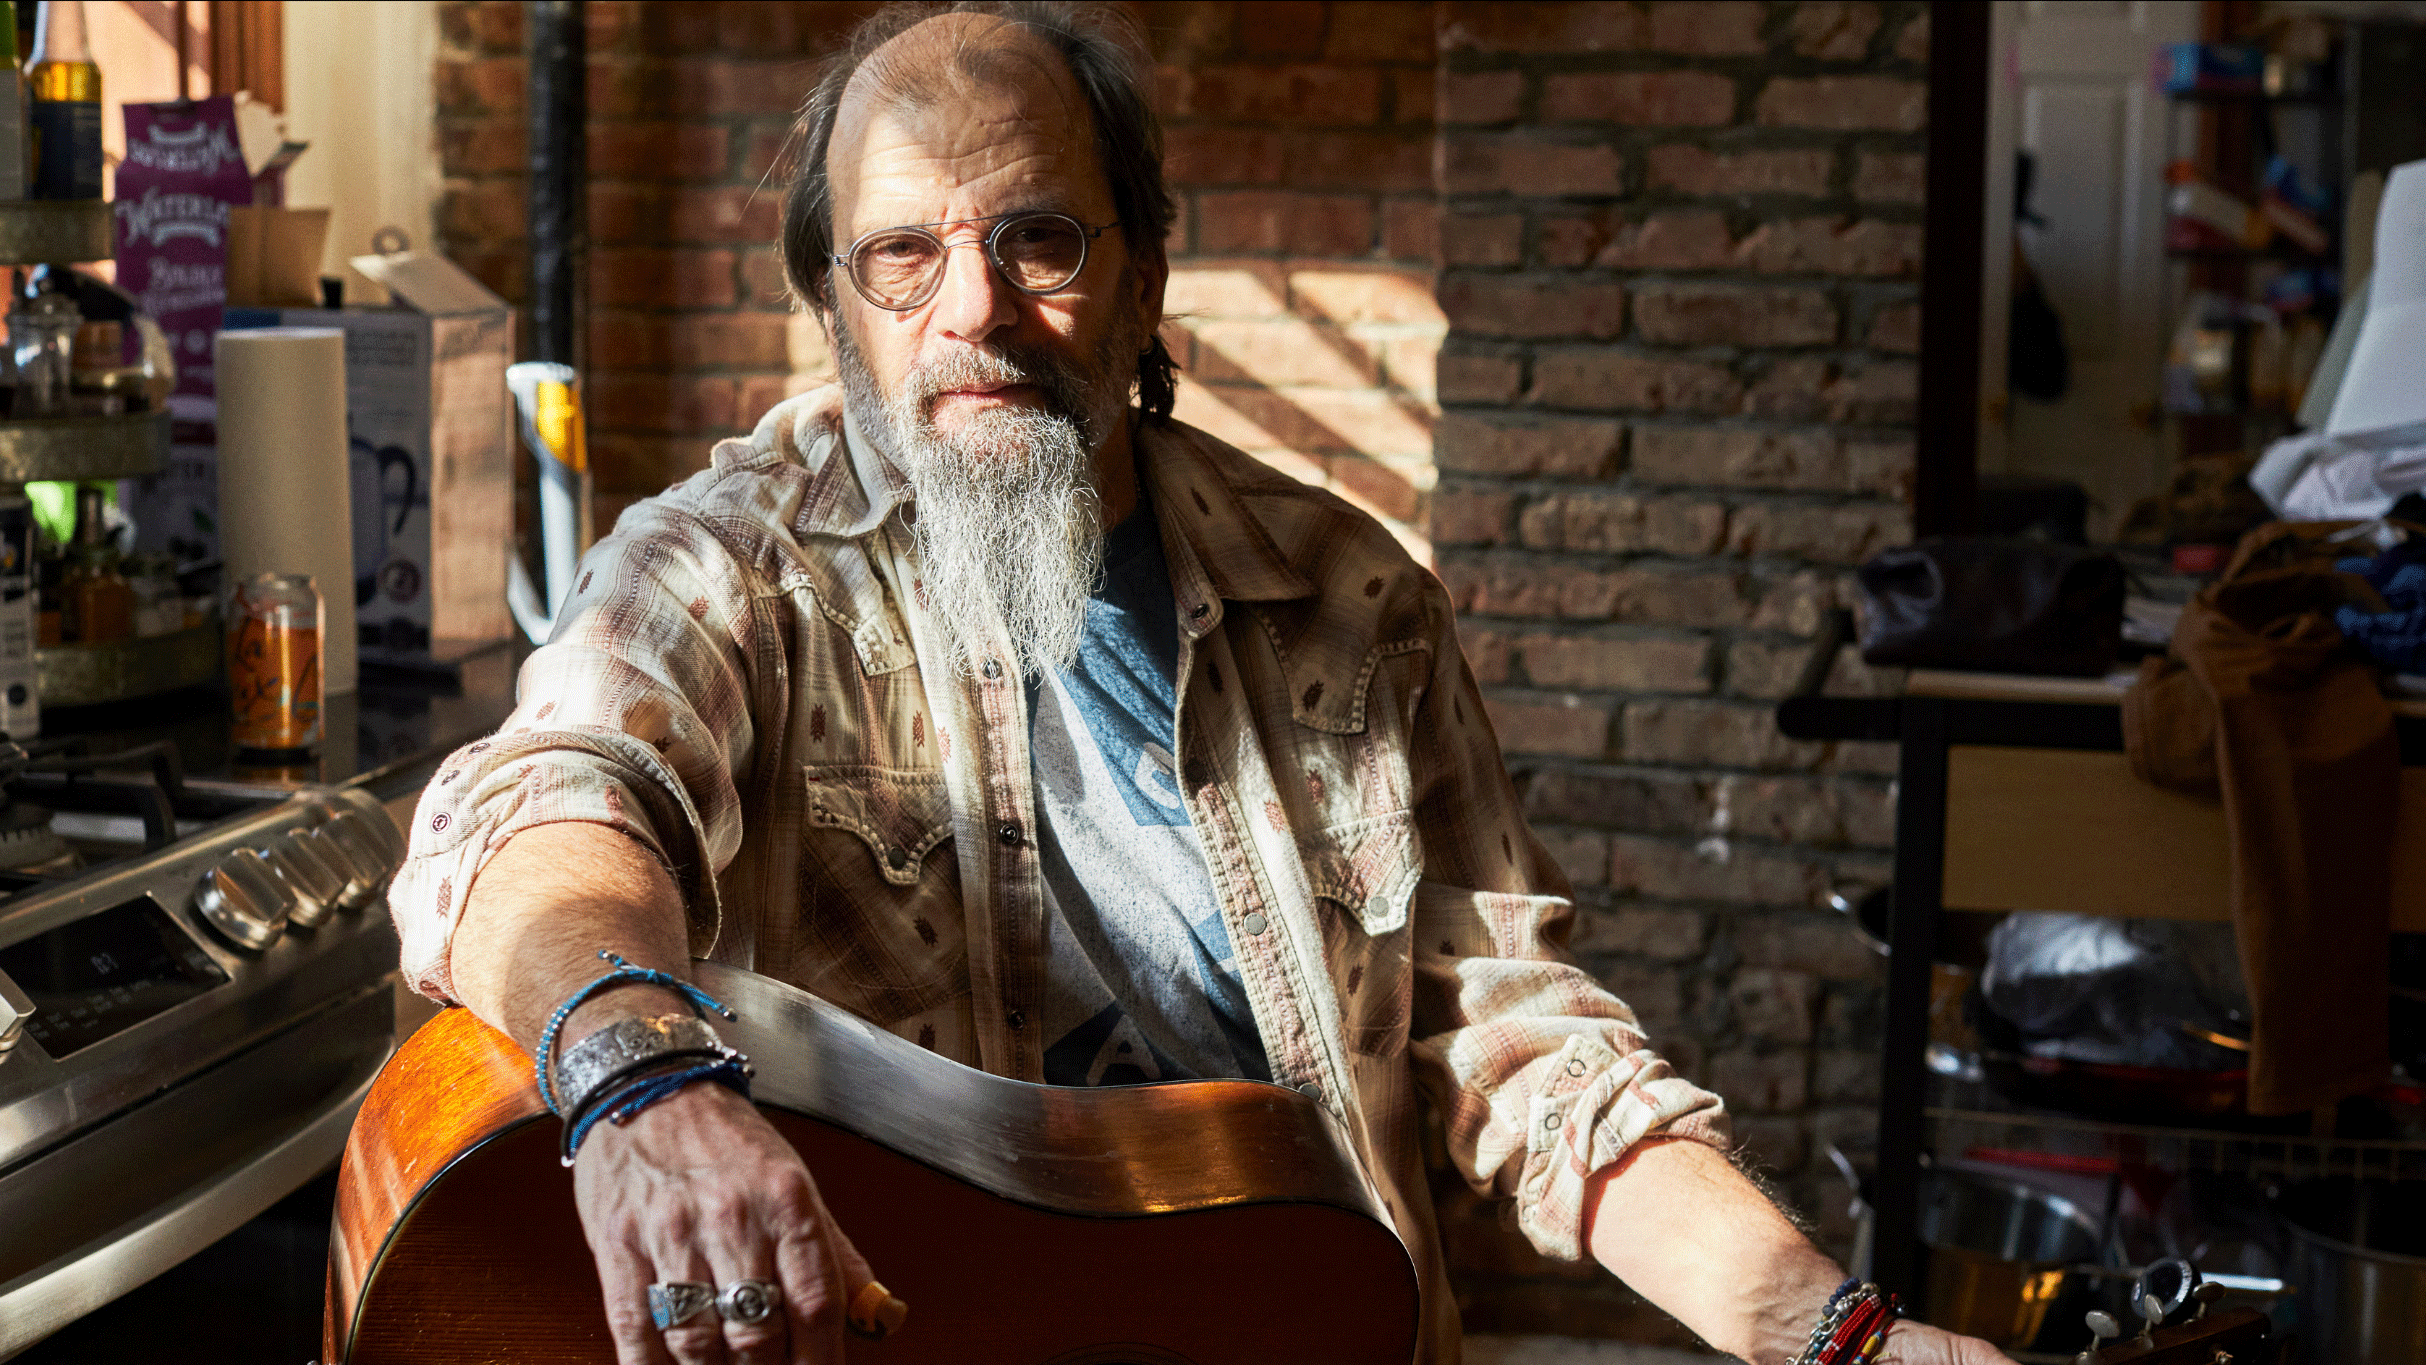 exclusive presale password for Steve Earle presale tickets in Fort Worth at Tannahill's Tavern and Music Hall